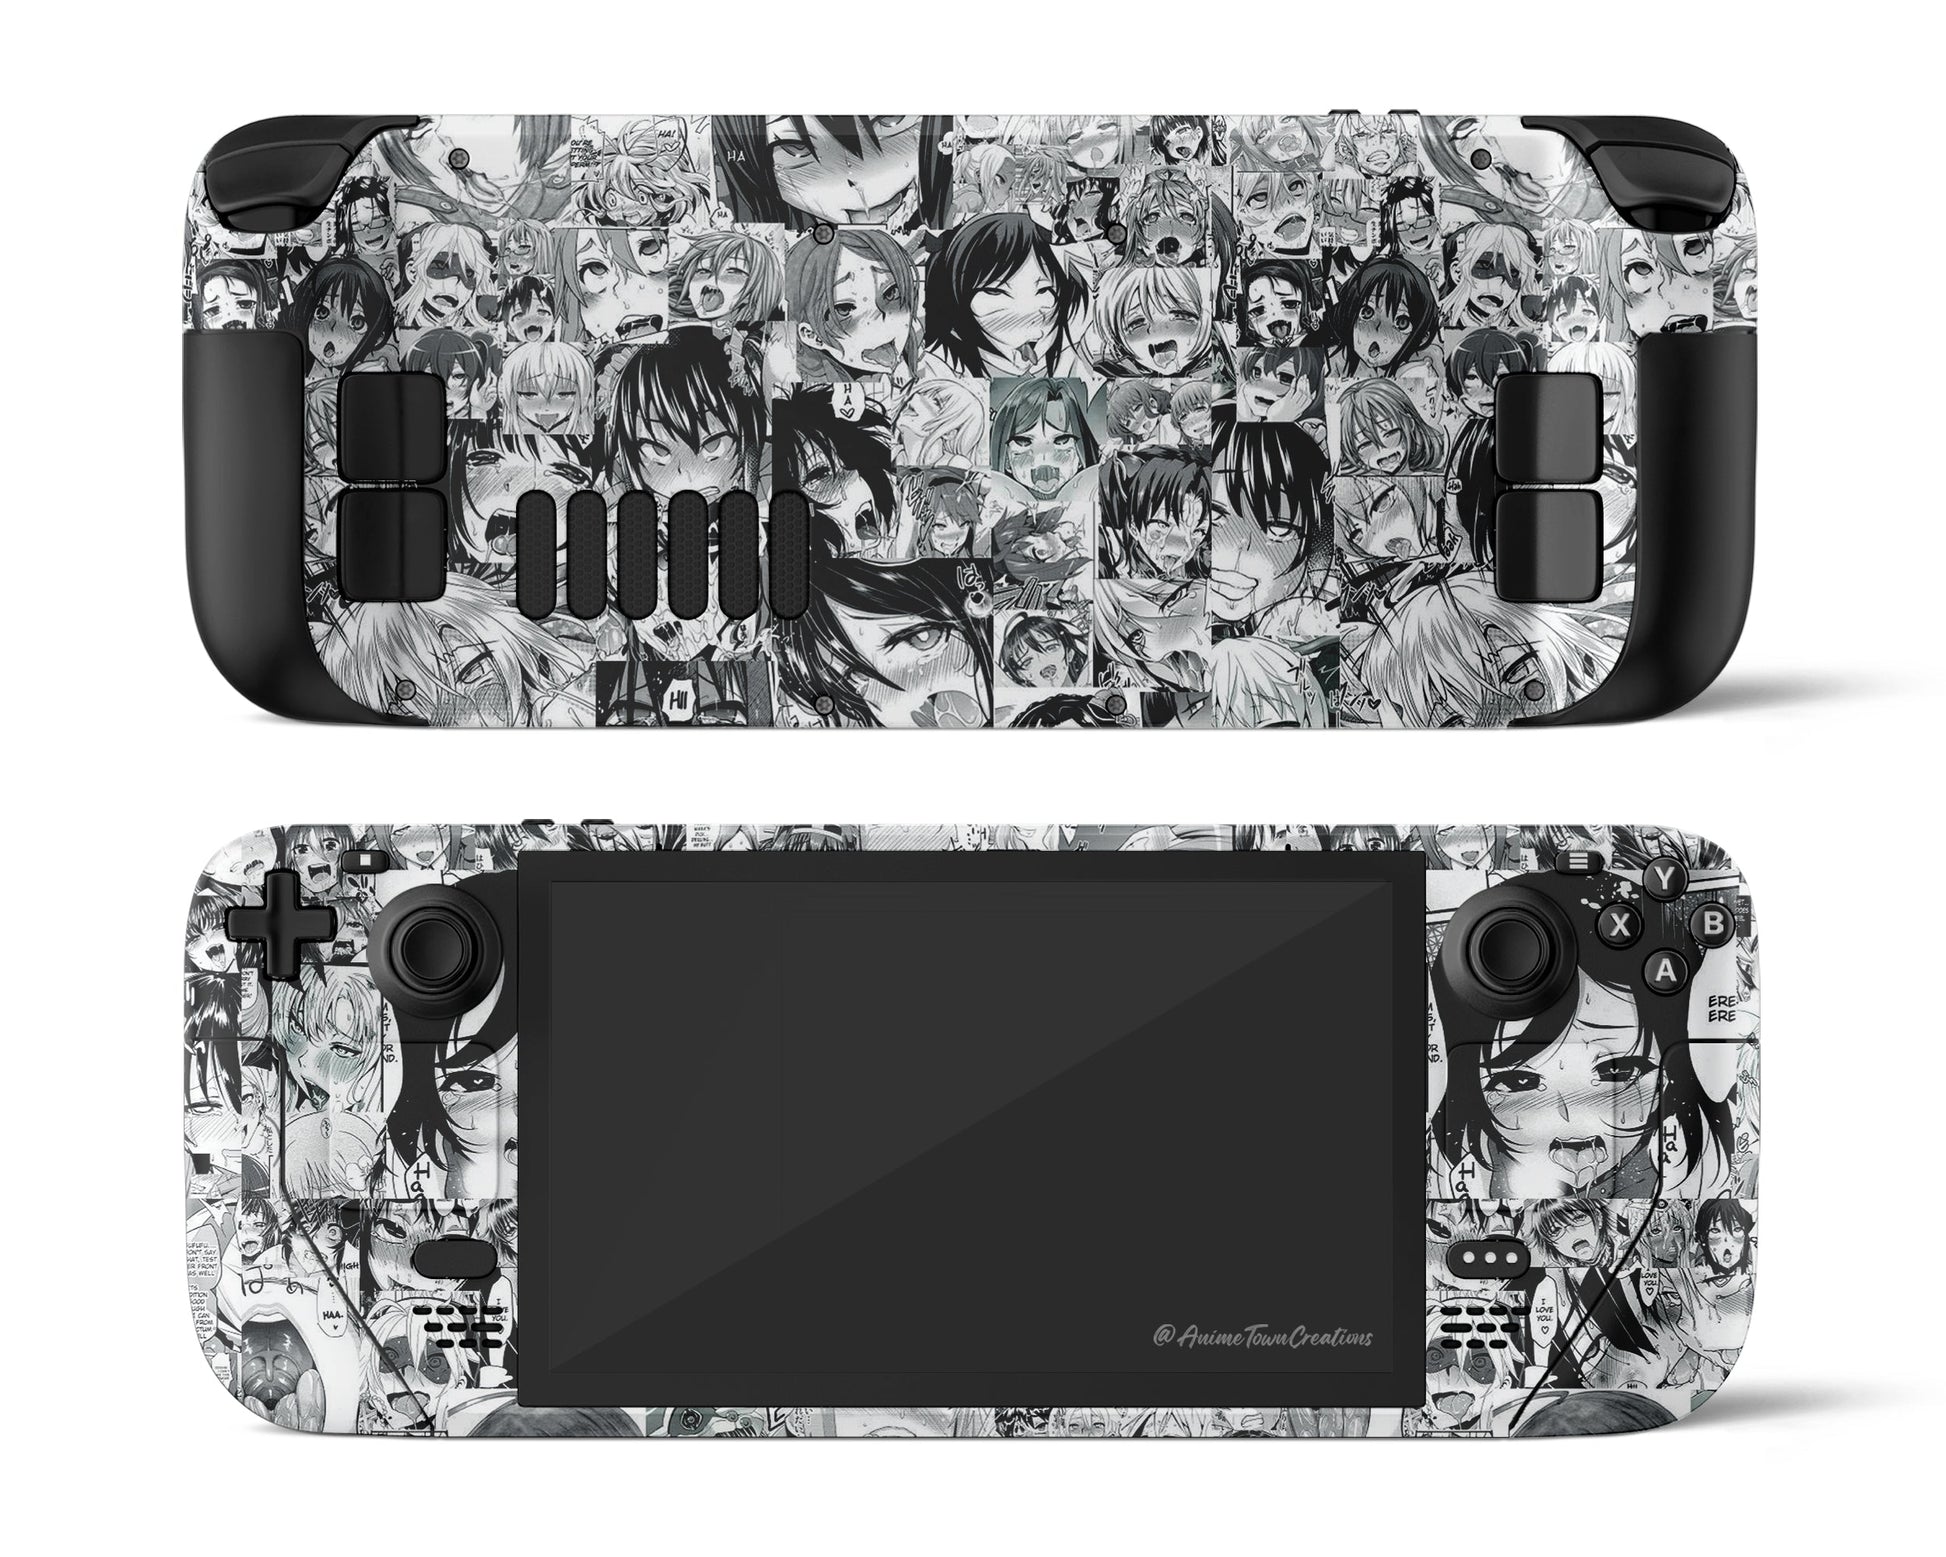 Anime Town Creations Steam Deck Ahegao Manga Vinyl only Skins - Anime Quotes Steam Deck Skin